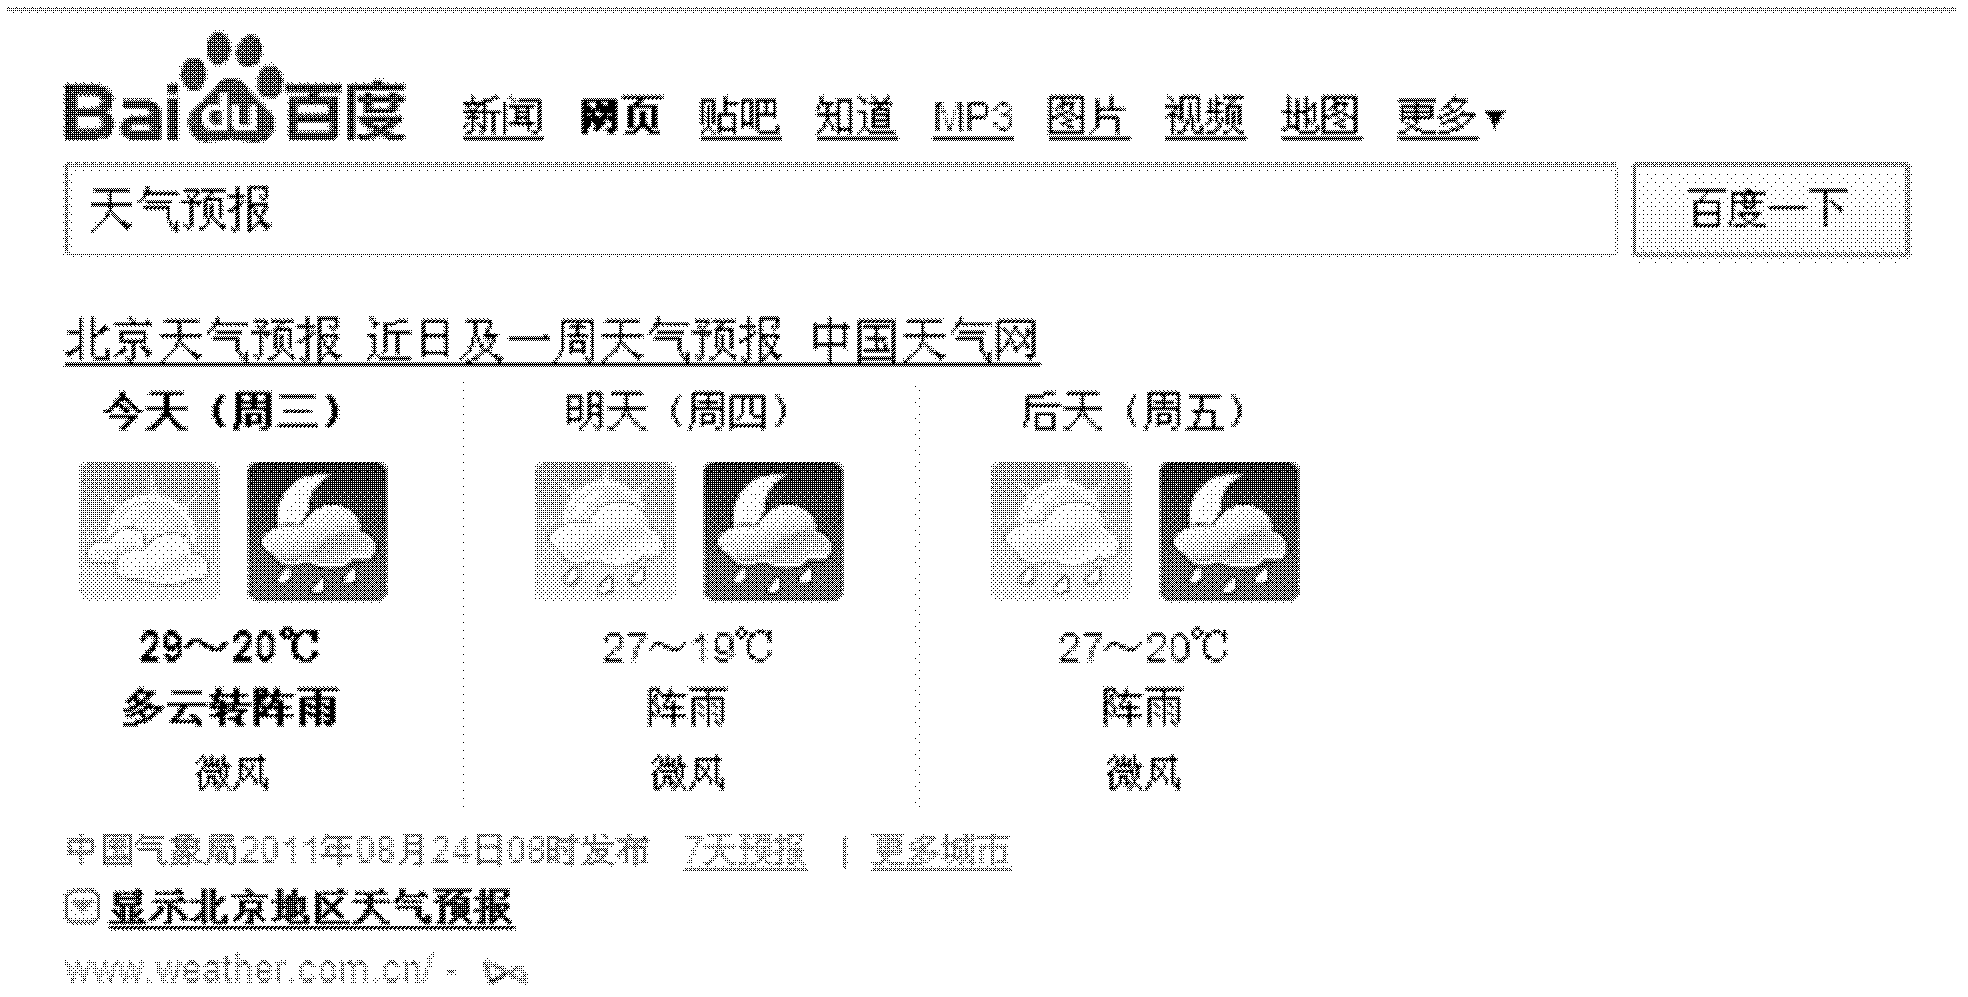 Method and system for sequencing search results